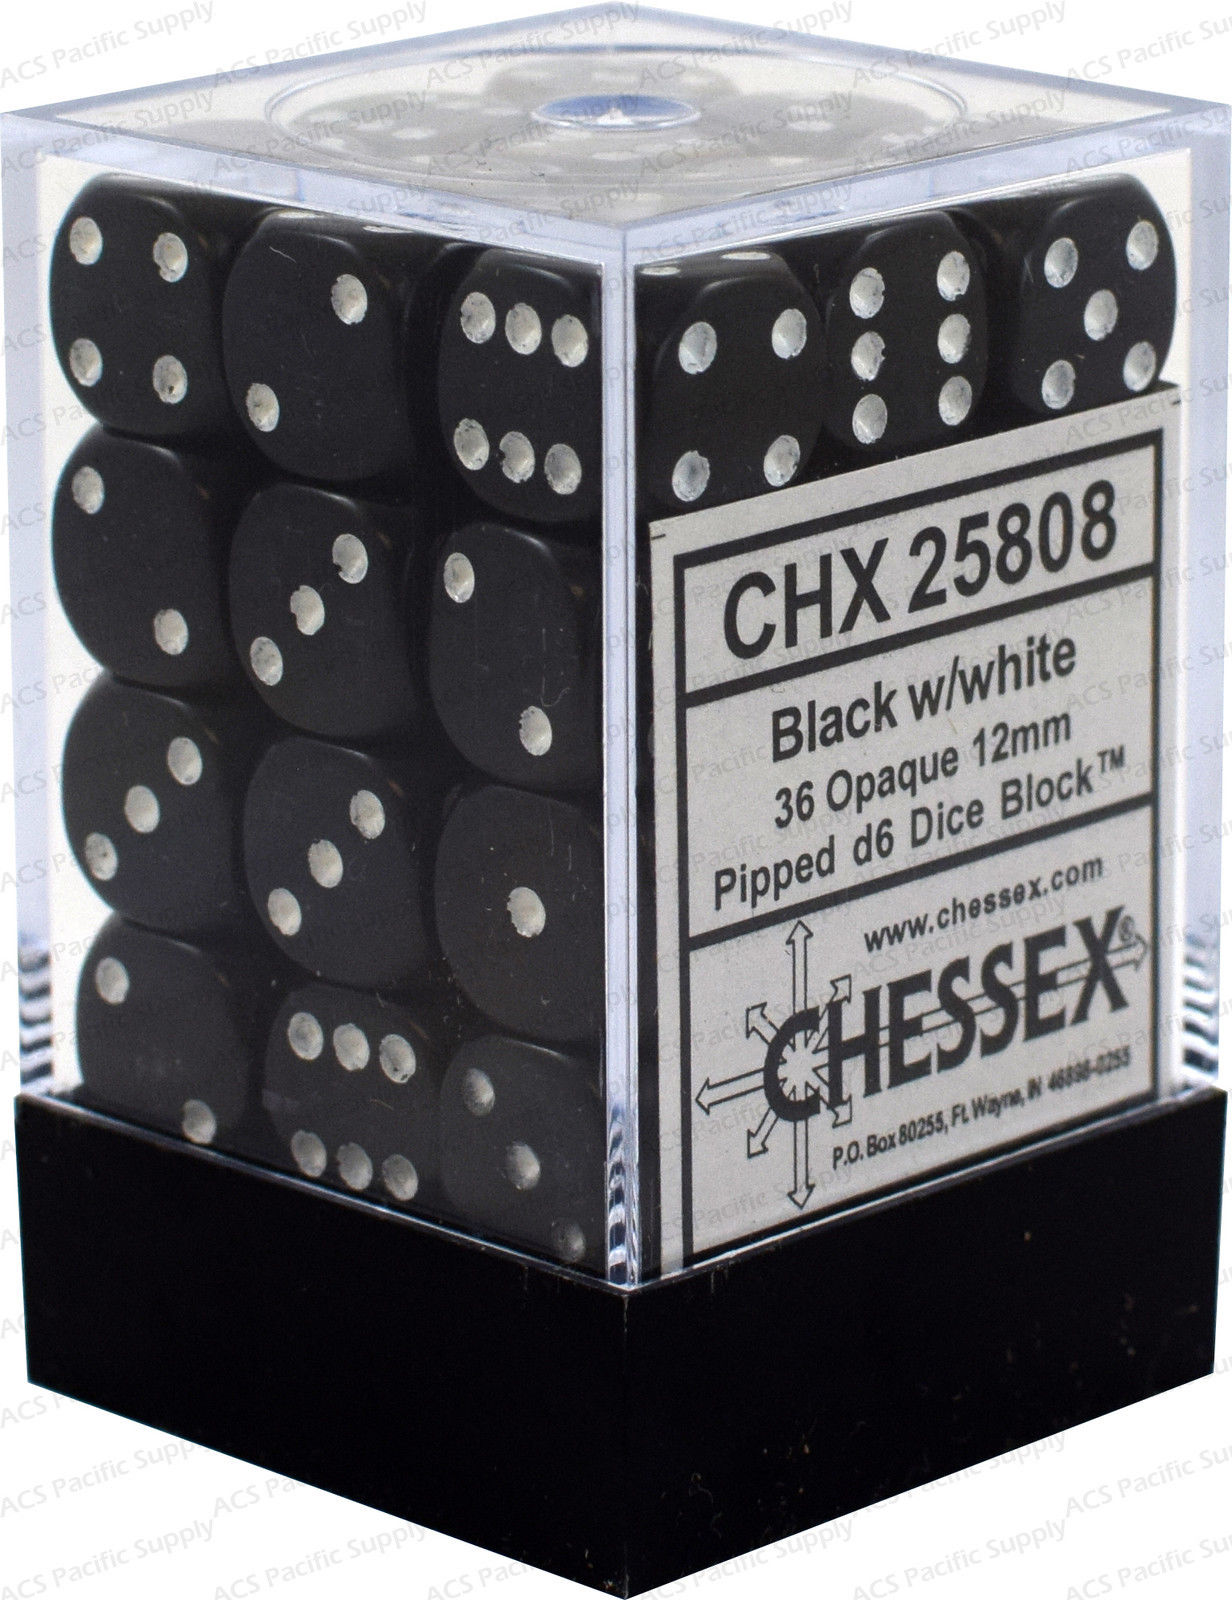 Chessex Opaque 36x 12mm Dice Black with White